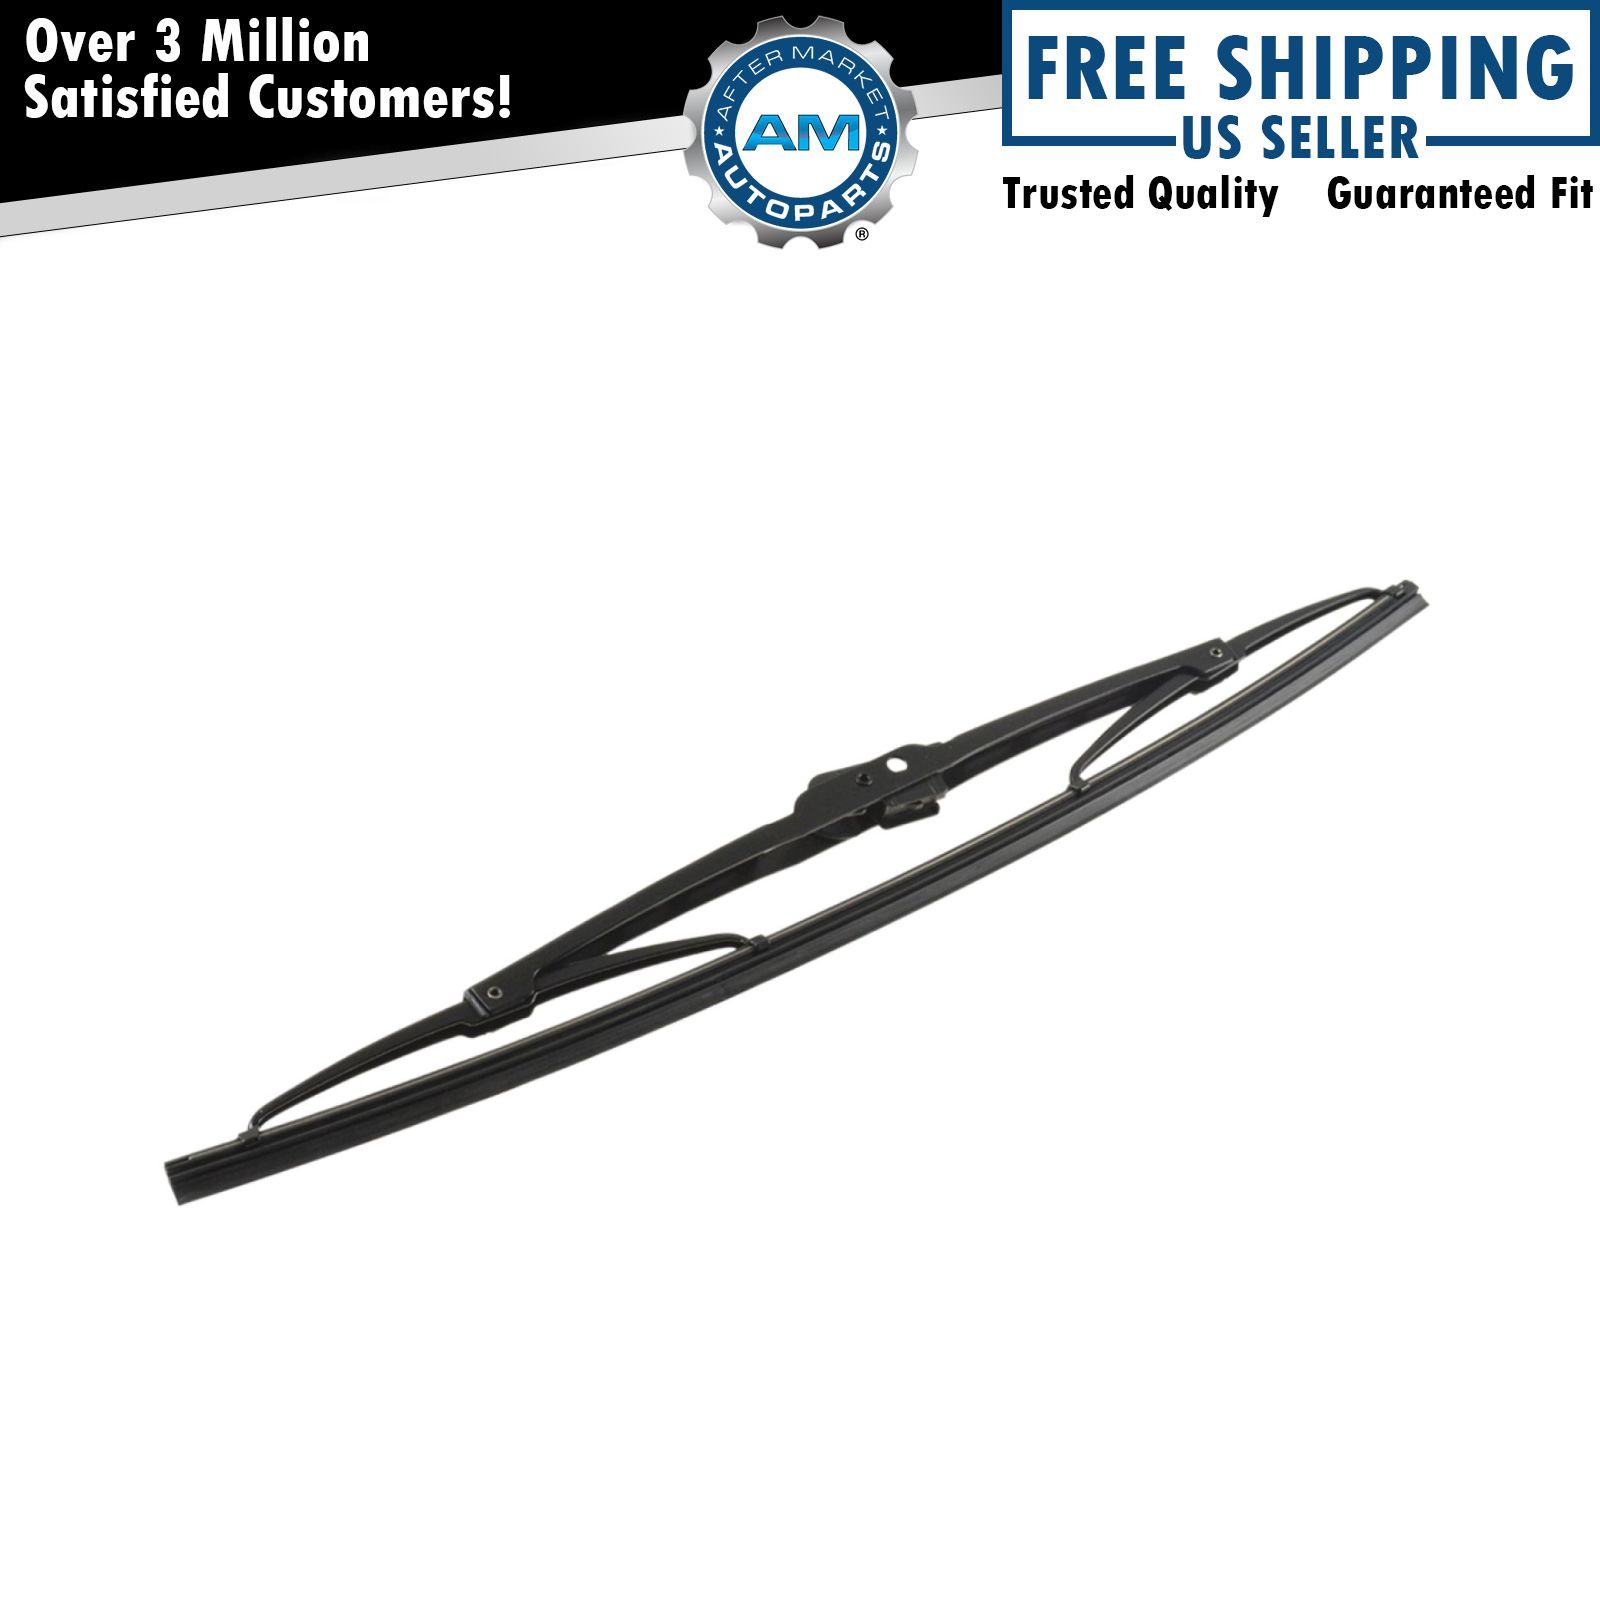 OEM Mopar 1AMWC016AA Wiper Blade 16" for Dodge Chrysler | eBay 2003 Town And Country Wiper Blade Size